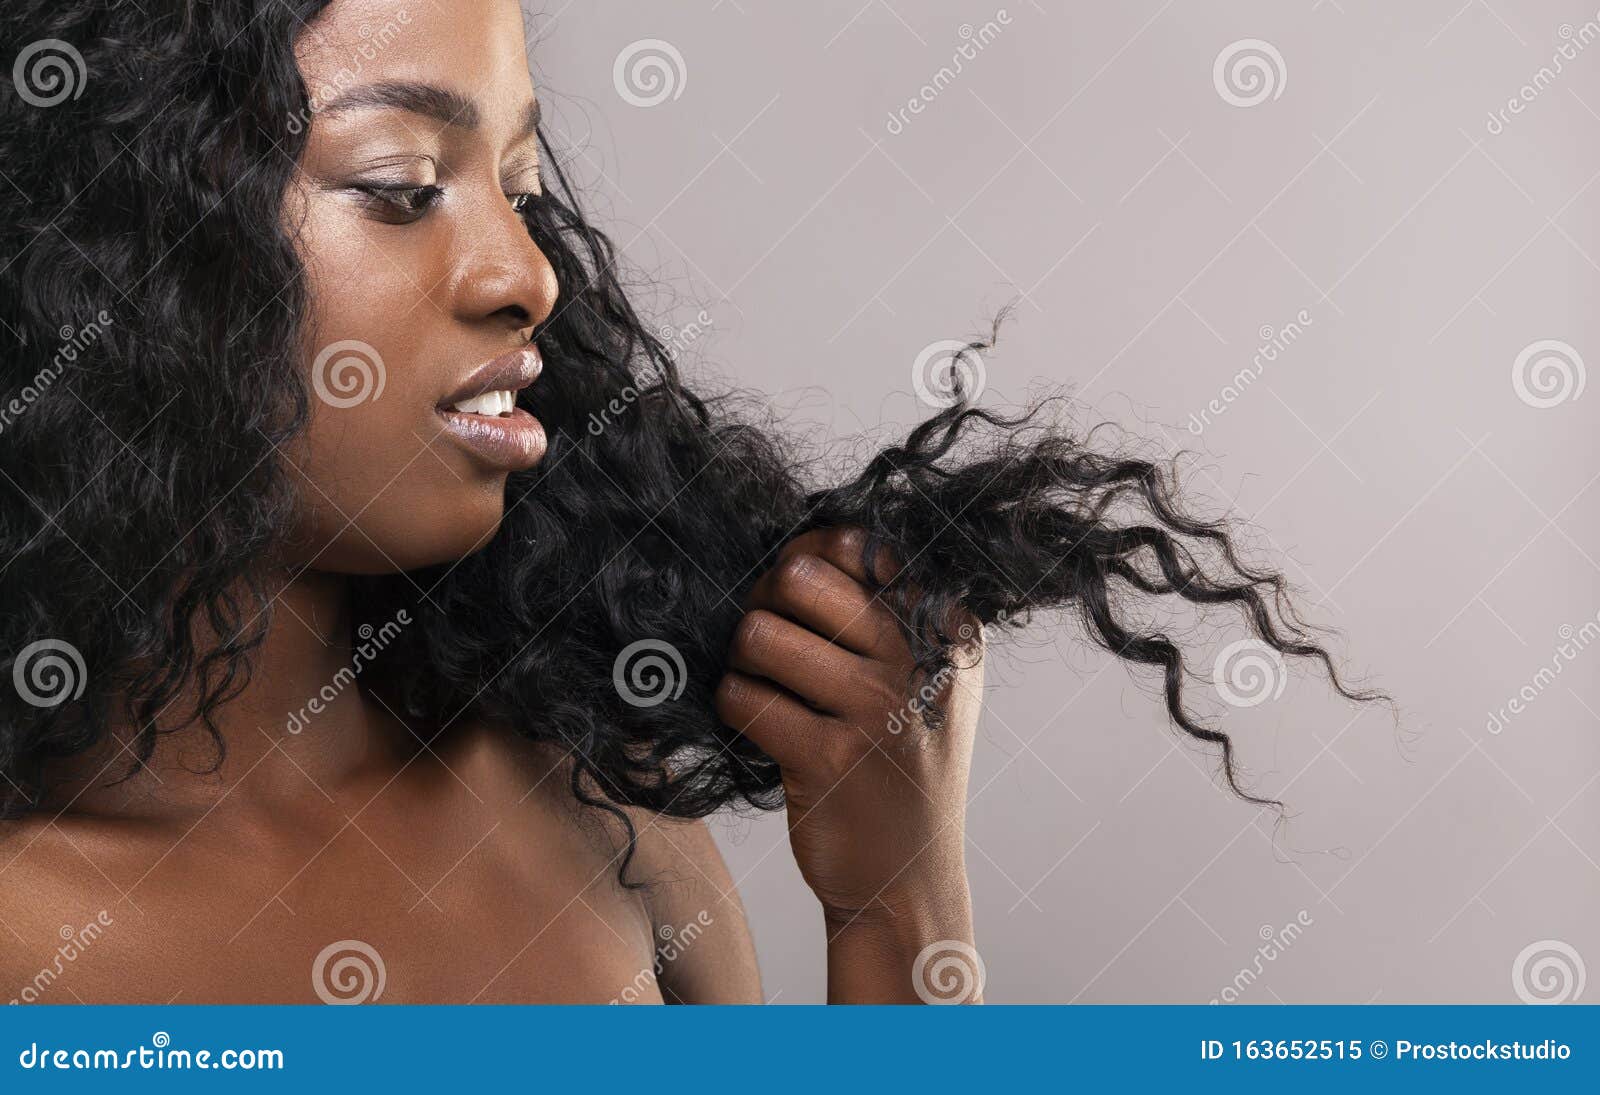 4 Tips To Prevent Split Ends For Healthy Natural Hair  Millennial in Debt